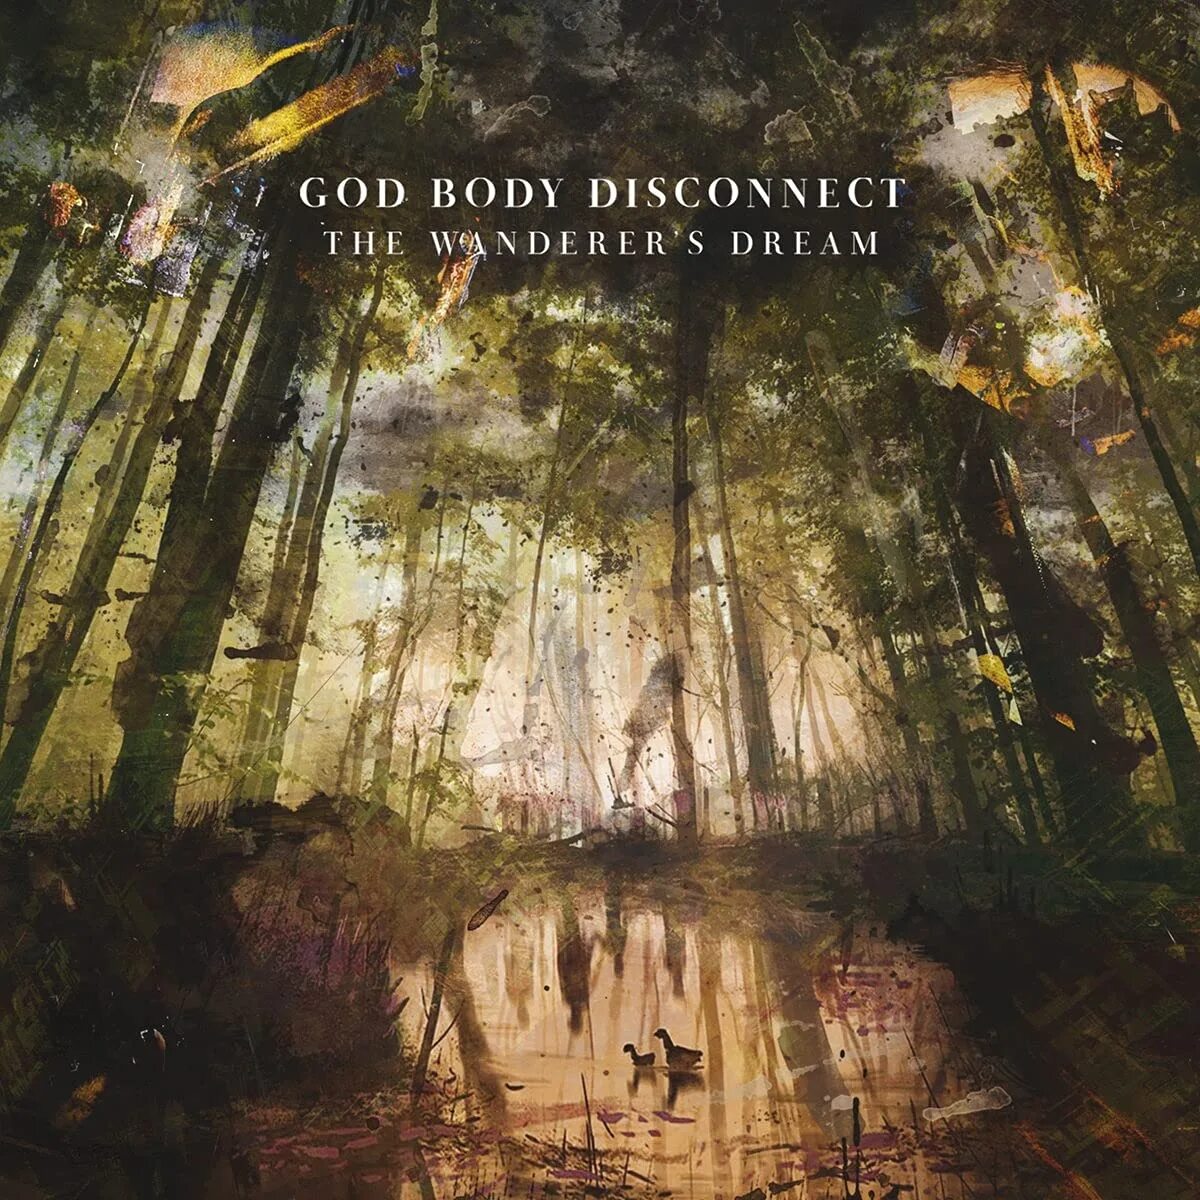 God body disconnect — the Wanderer's Dream. Dreamland Wanderer. Wormwitch — Heaven that Dwells within (2019). Body of a God.